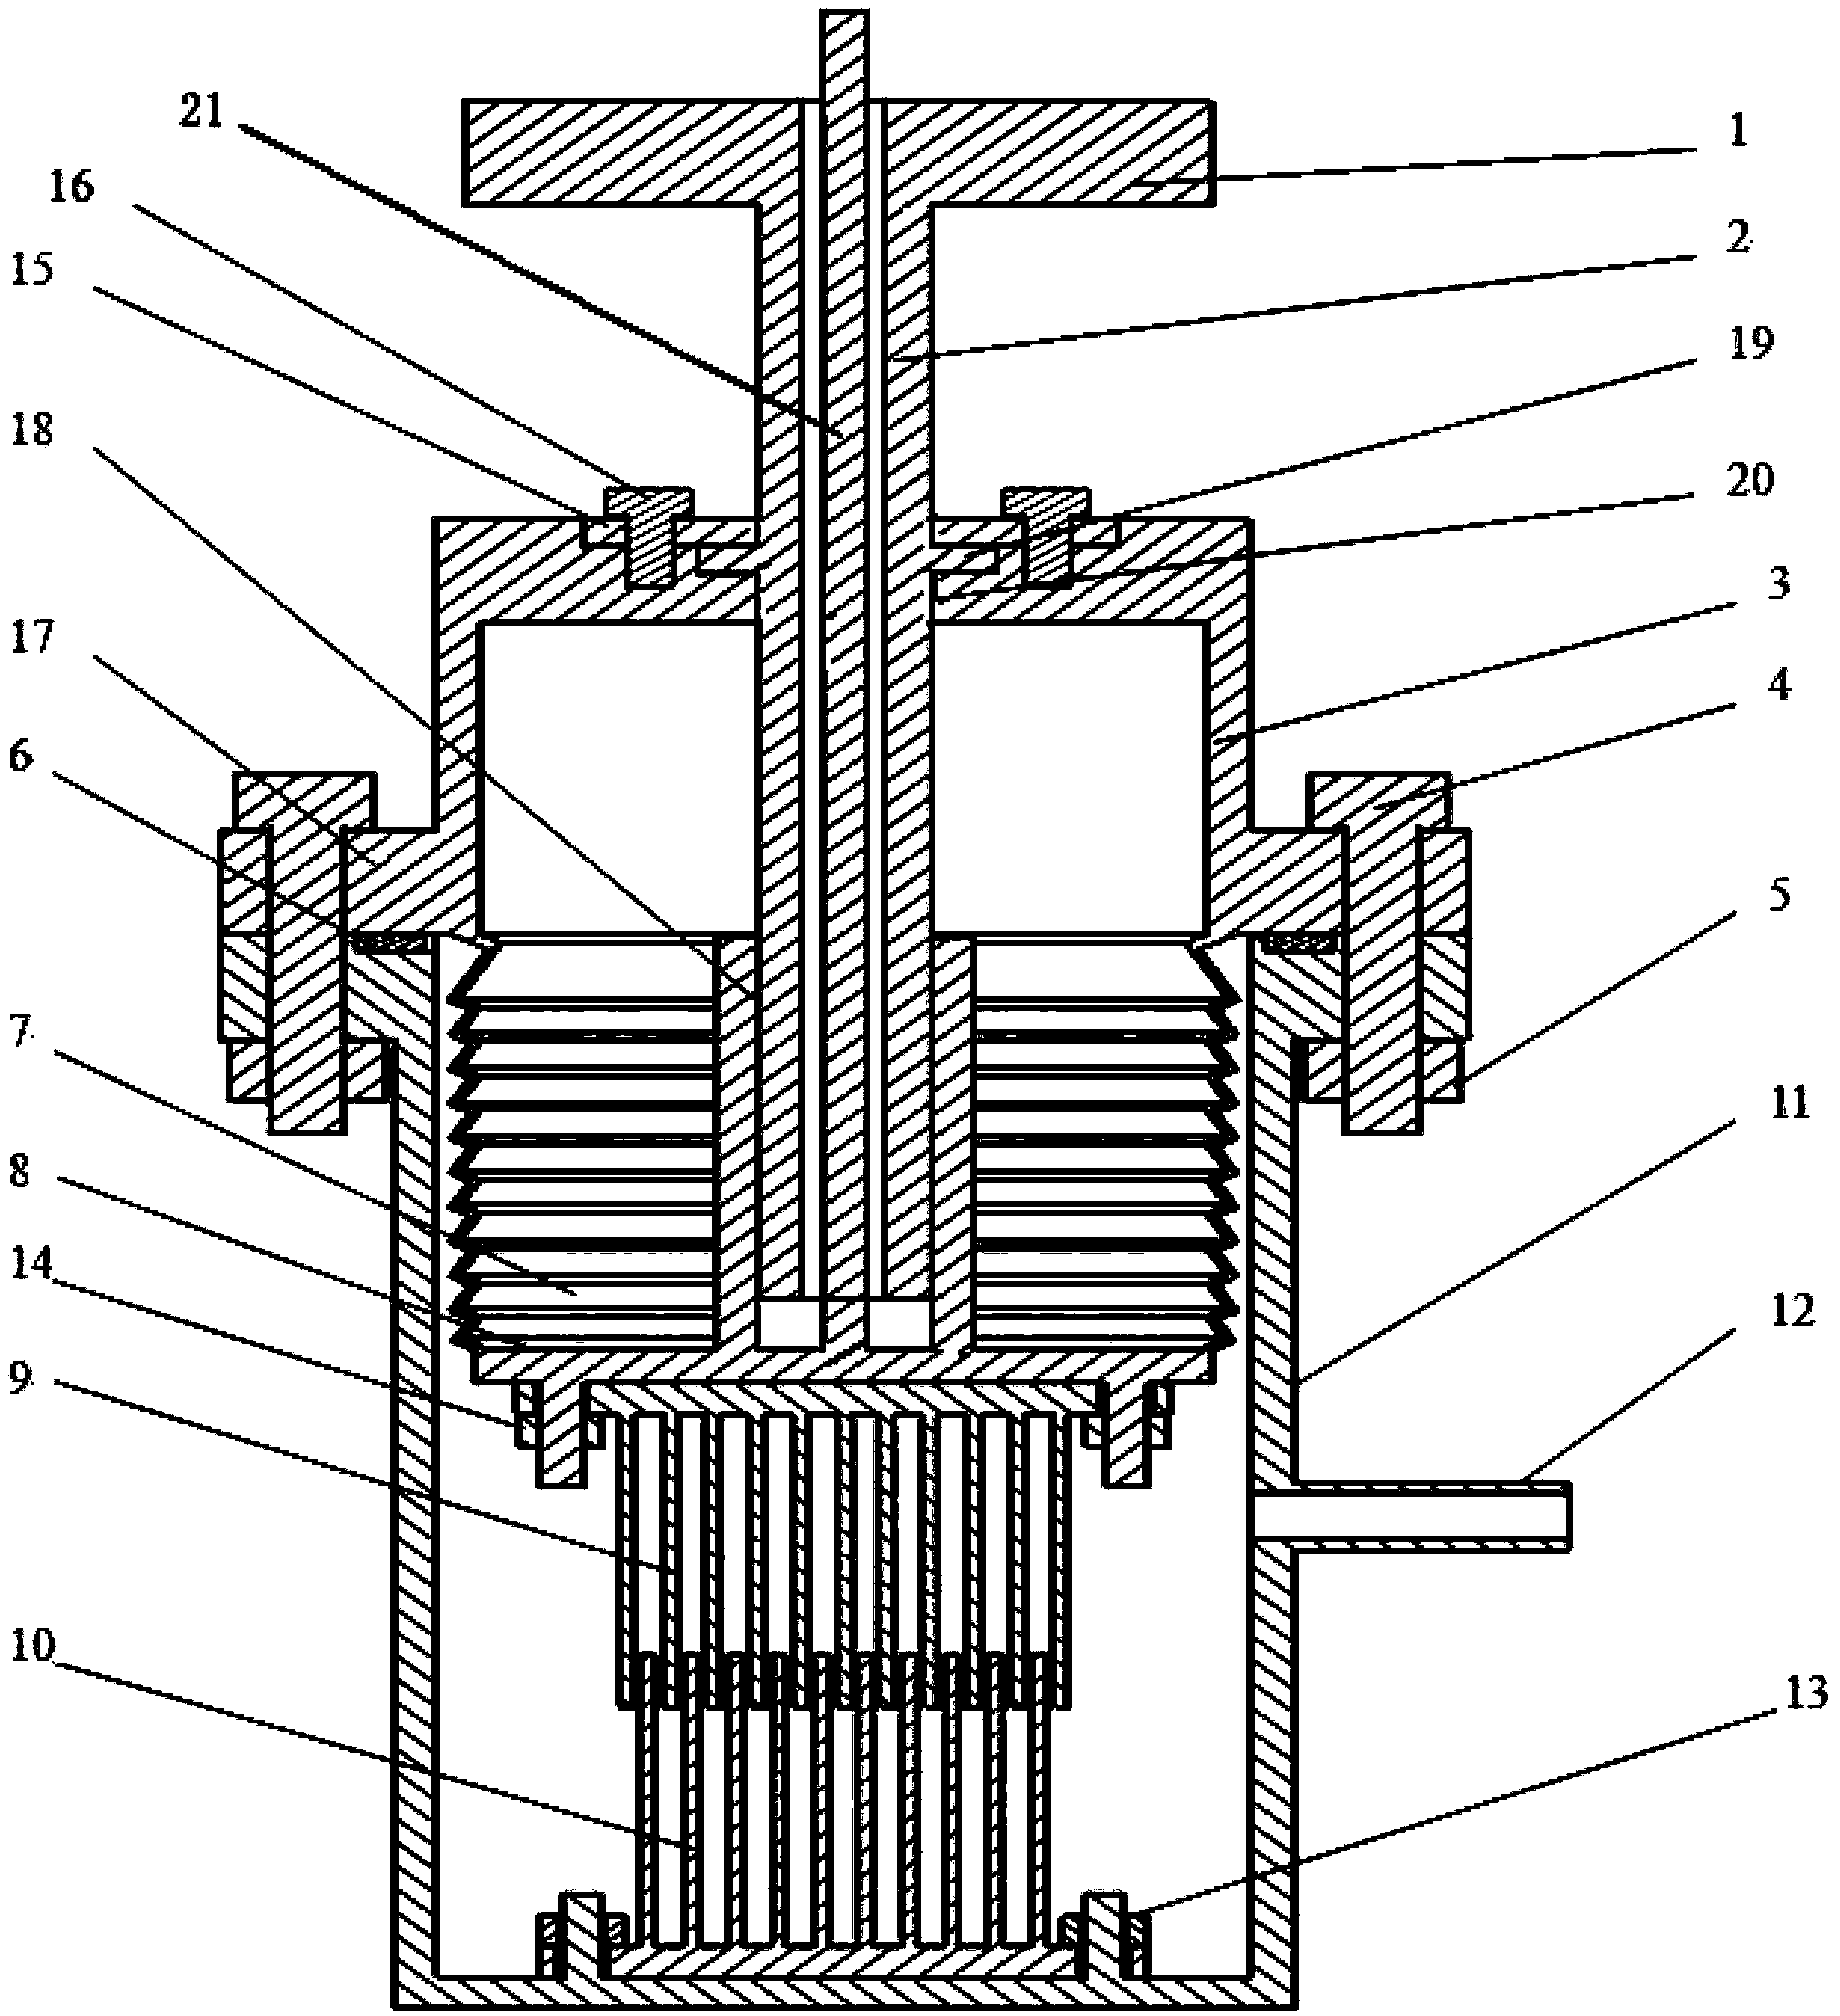 Generation device of controllable isotopic neutron source